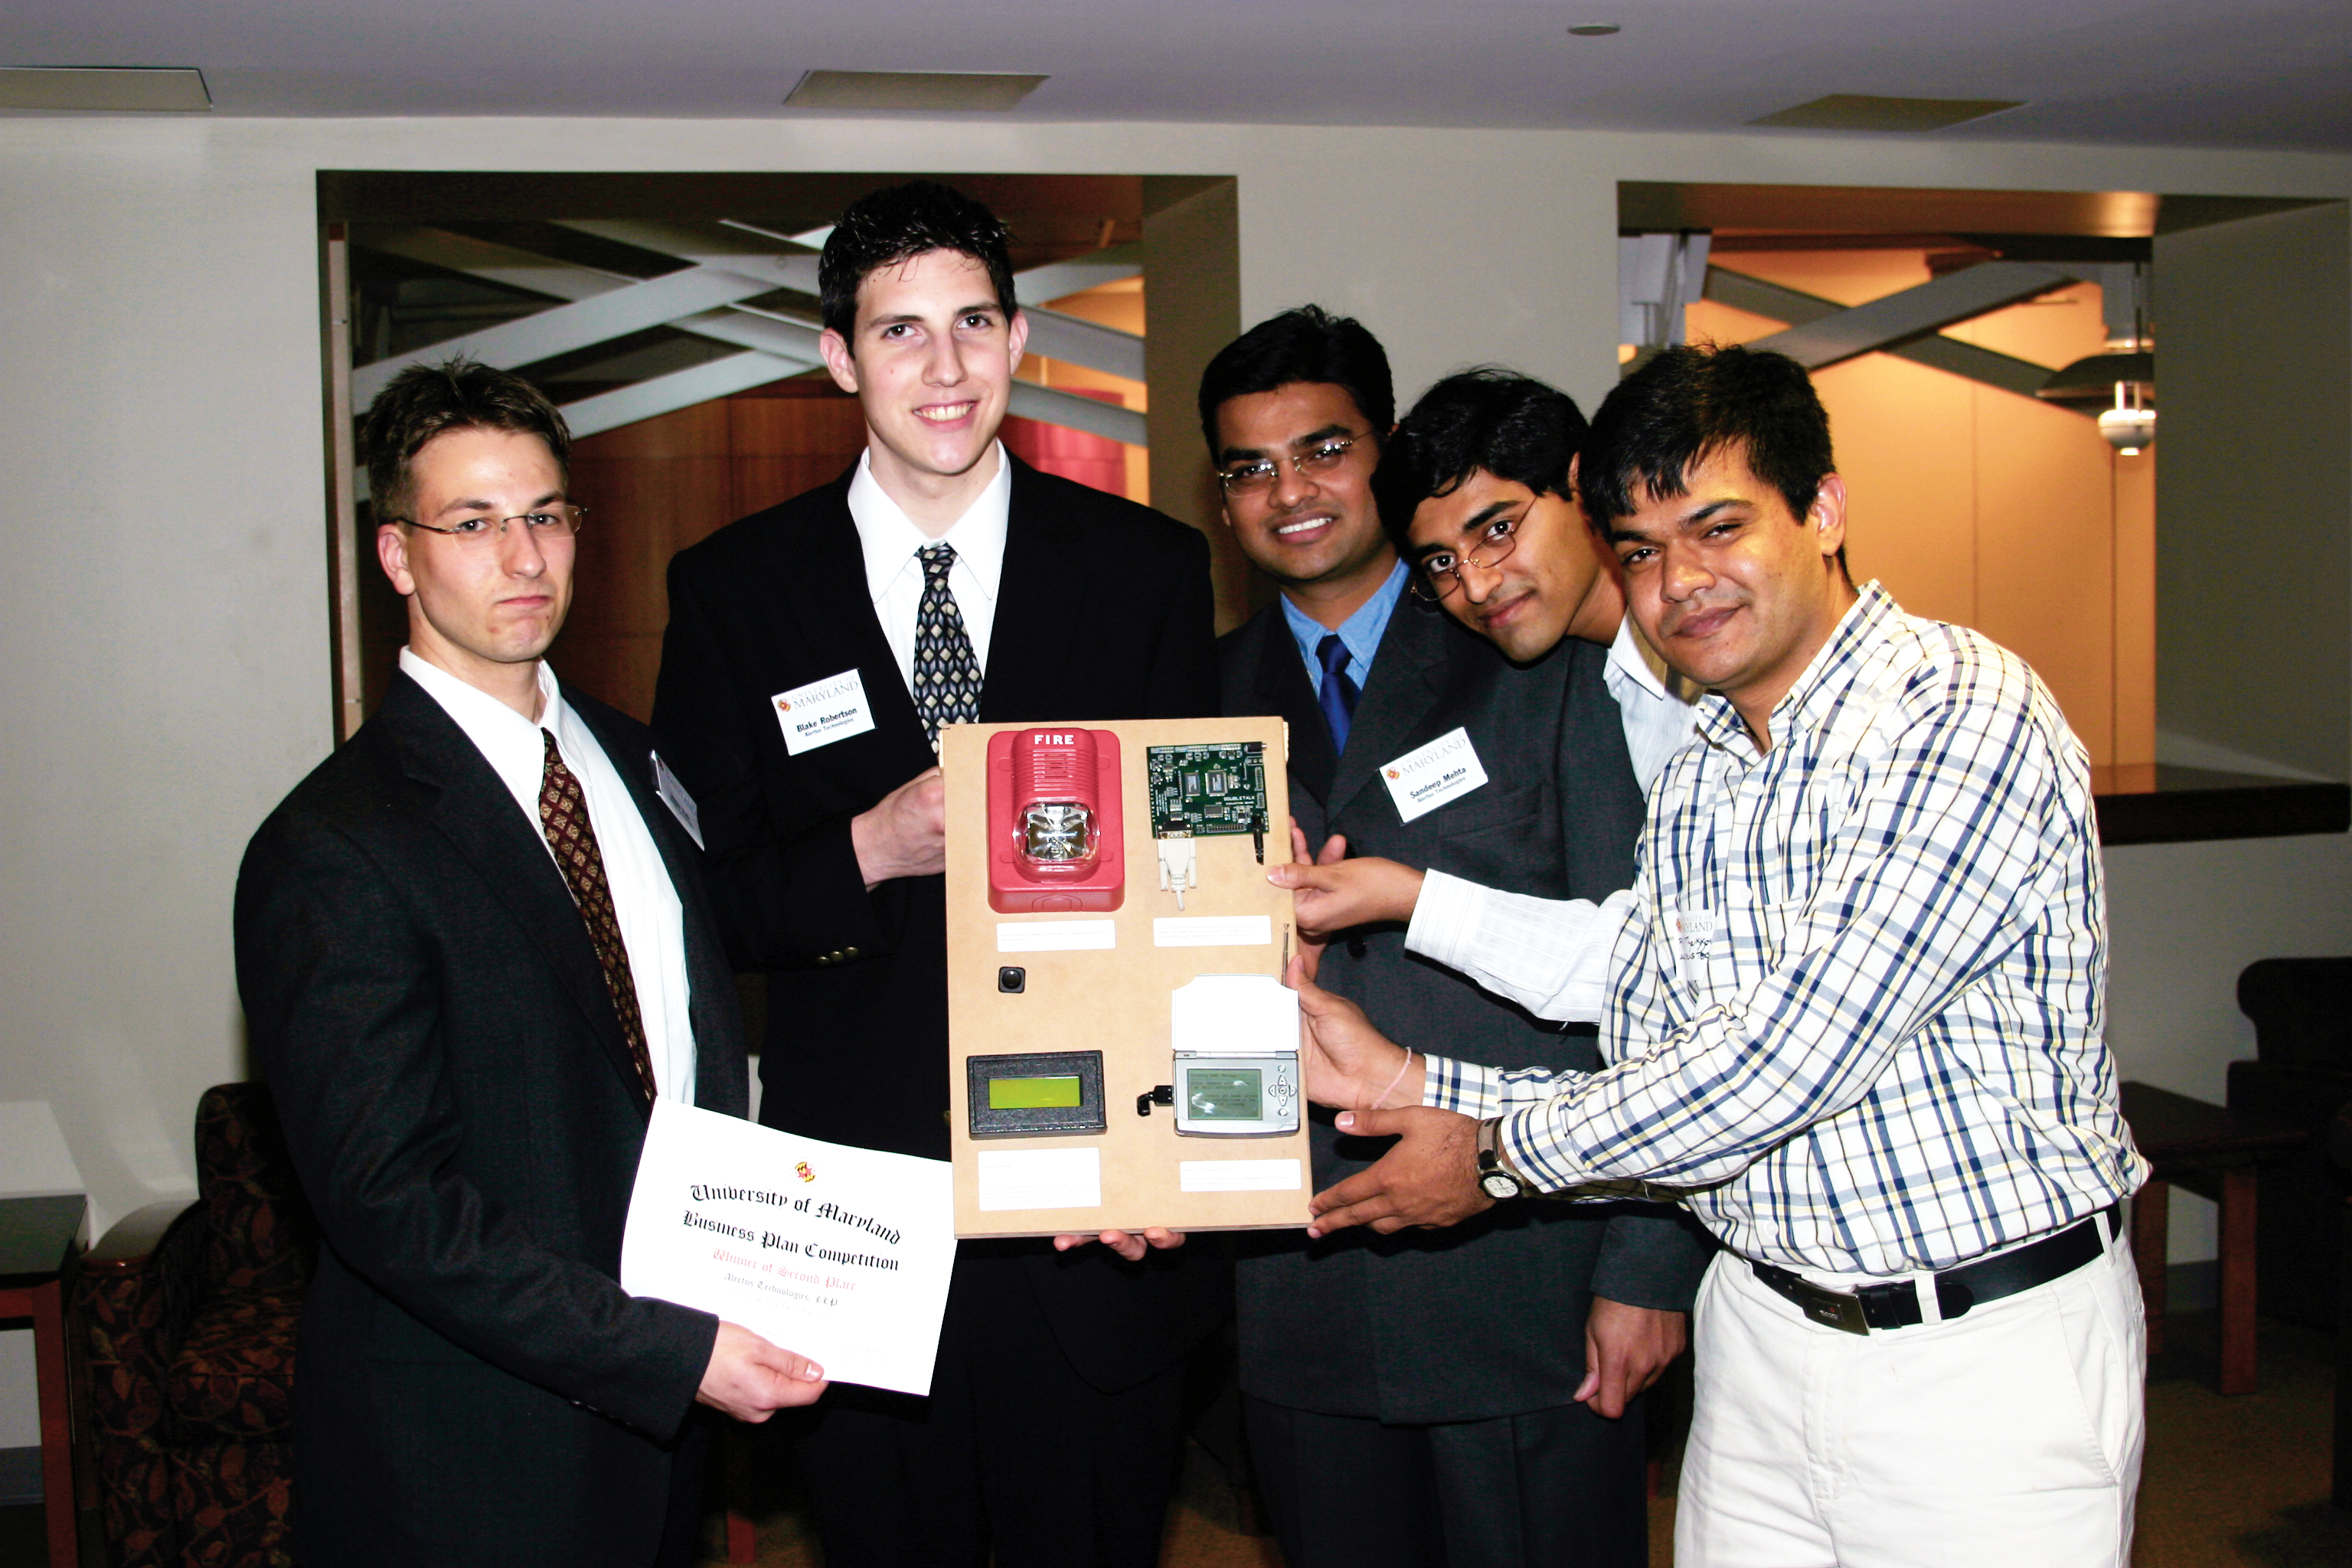 Alertus team winning the University of Maryland Business Plan Competition.